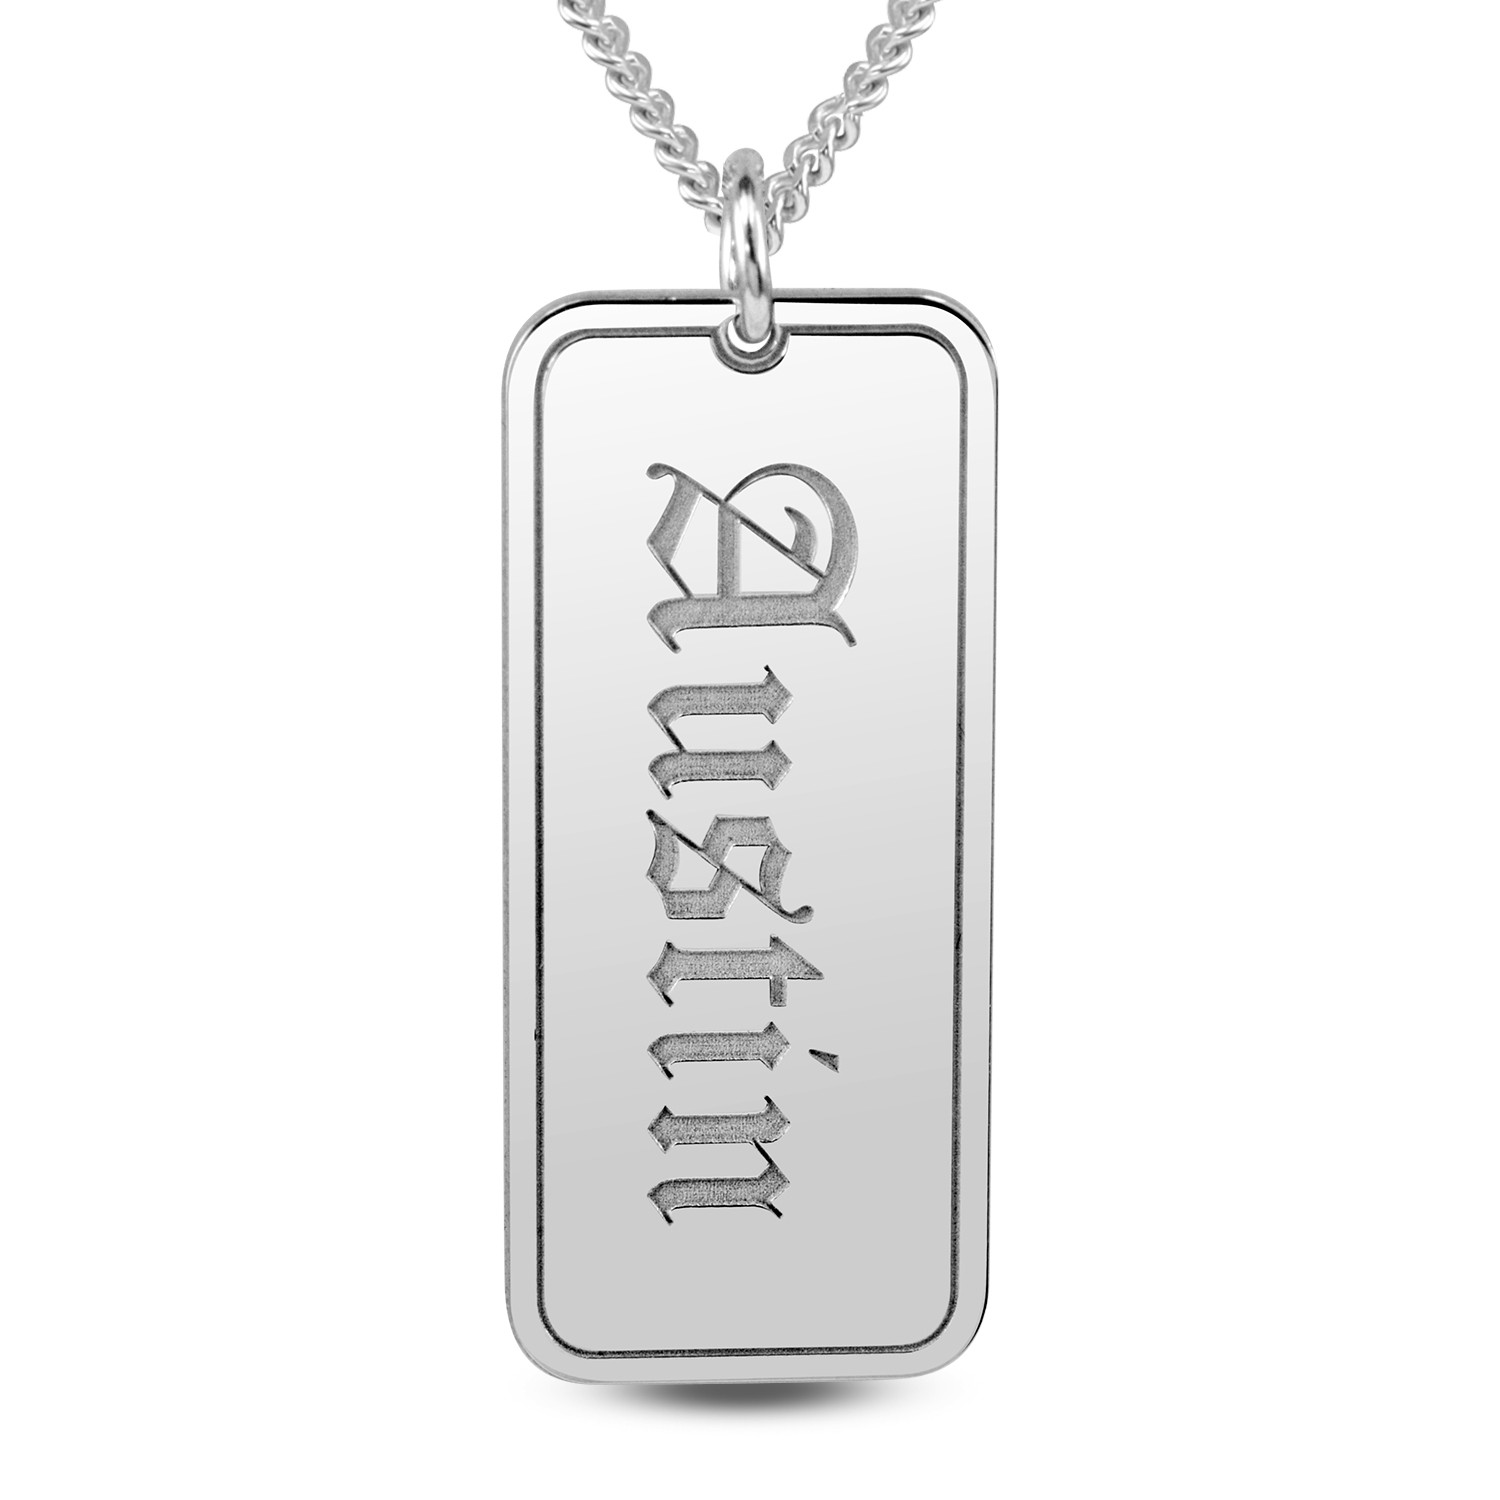 Men's Solitaire Cubic Zirconia and Gold-Tone Stainless Steel Dog Tag  Pendant Necklace